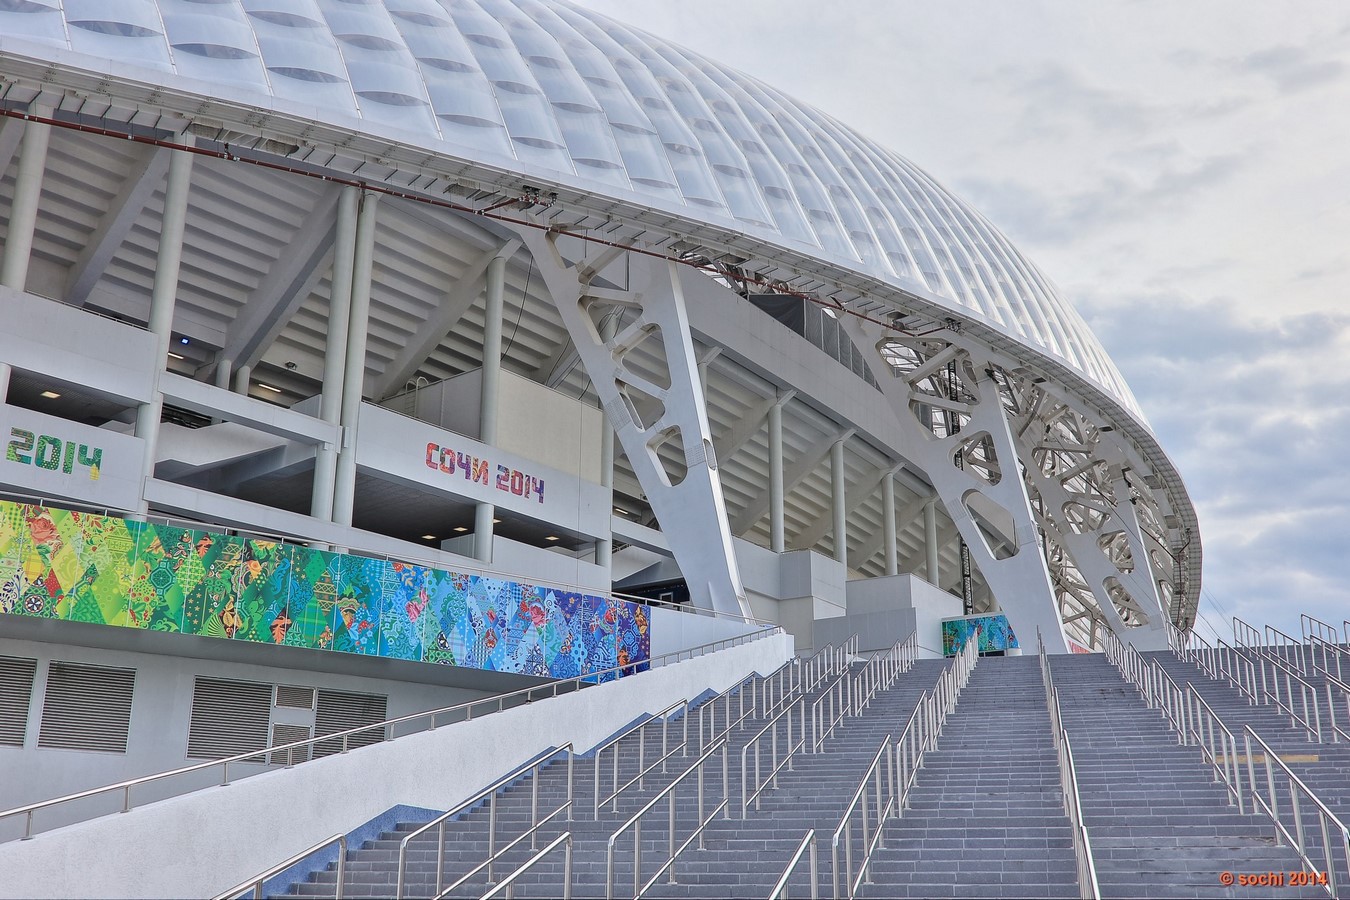 15 Largest stadiums used during the Olympics games Sheet39